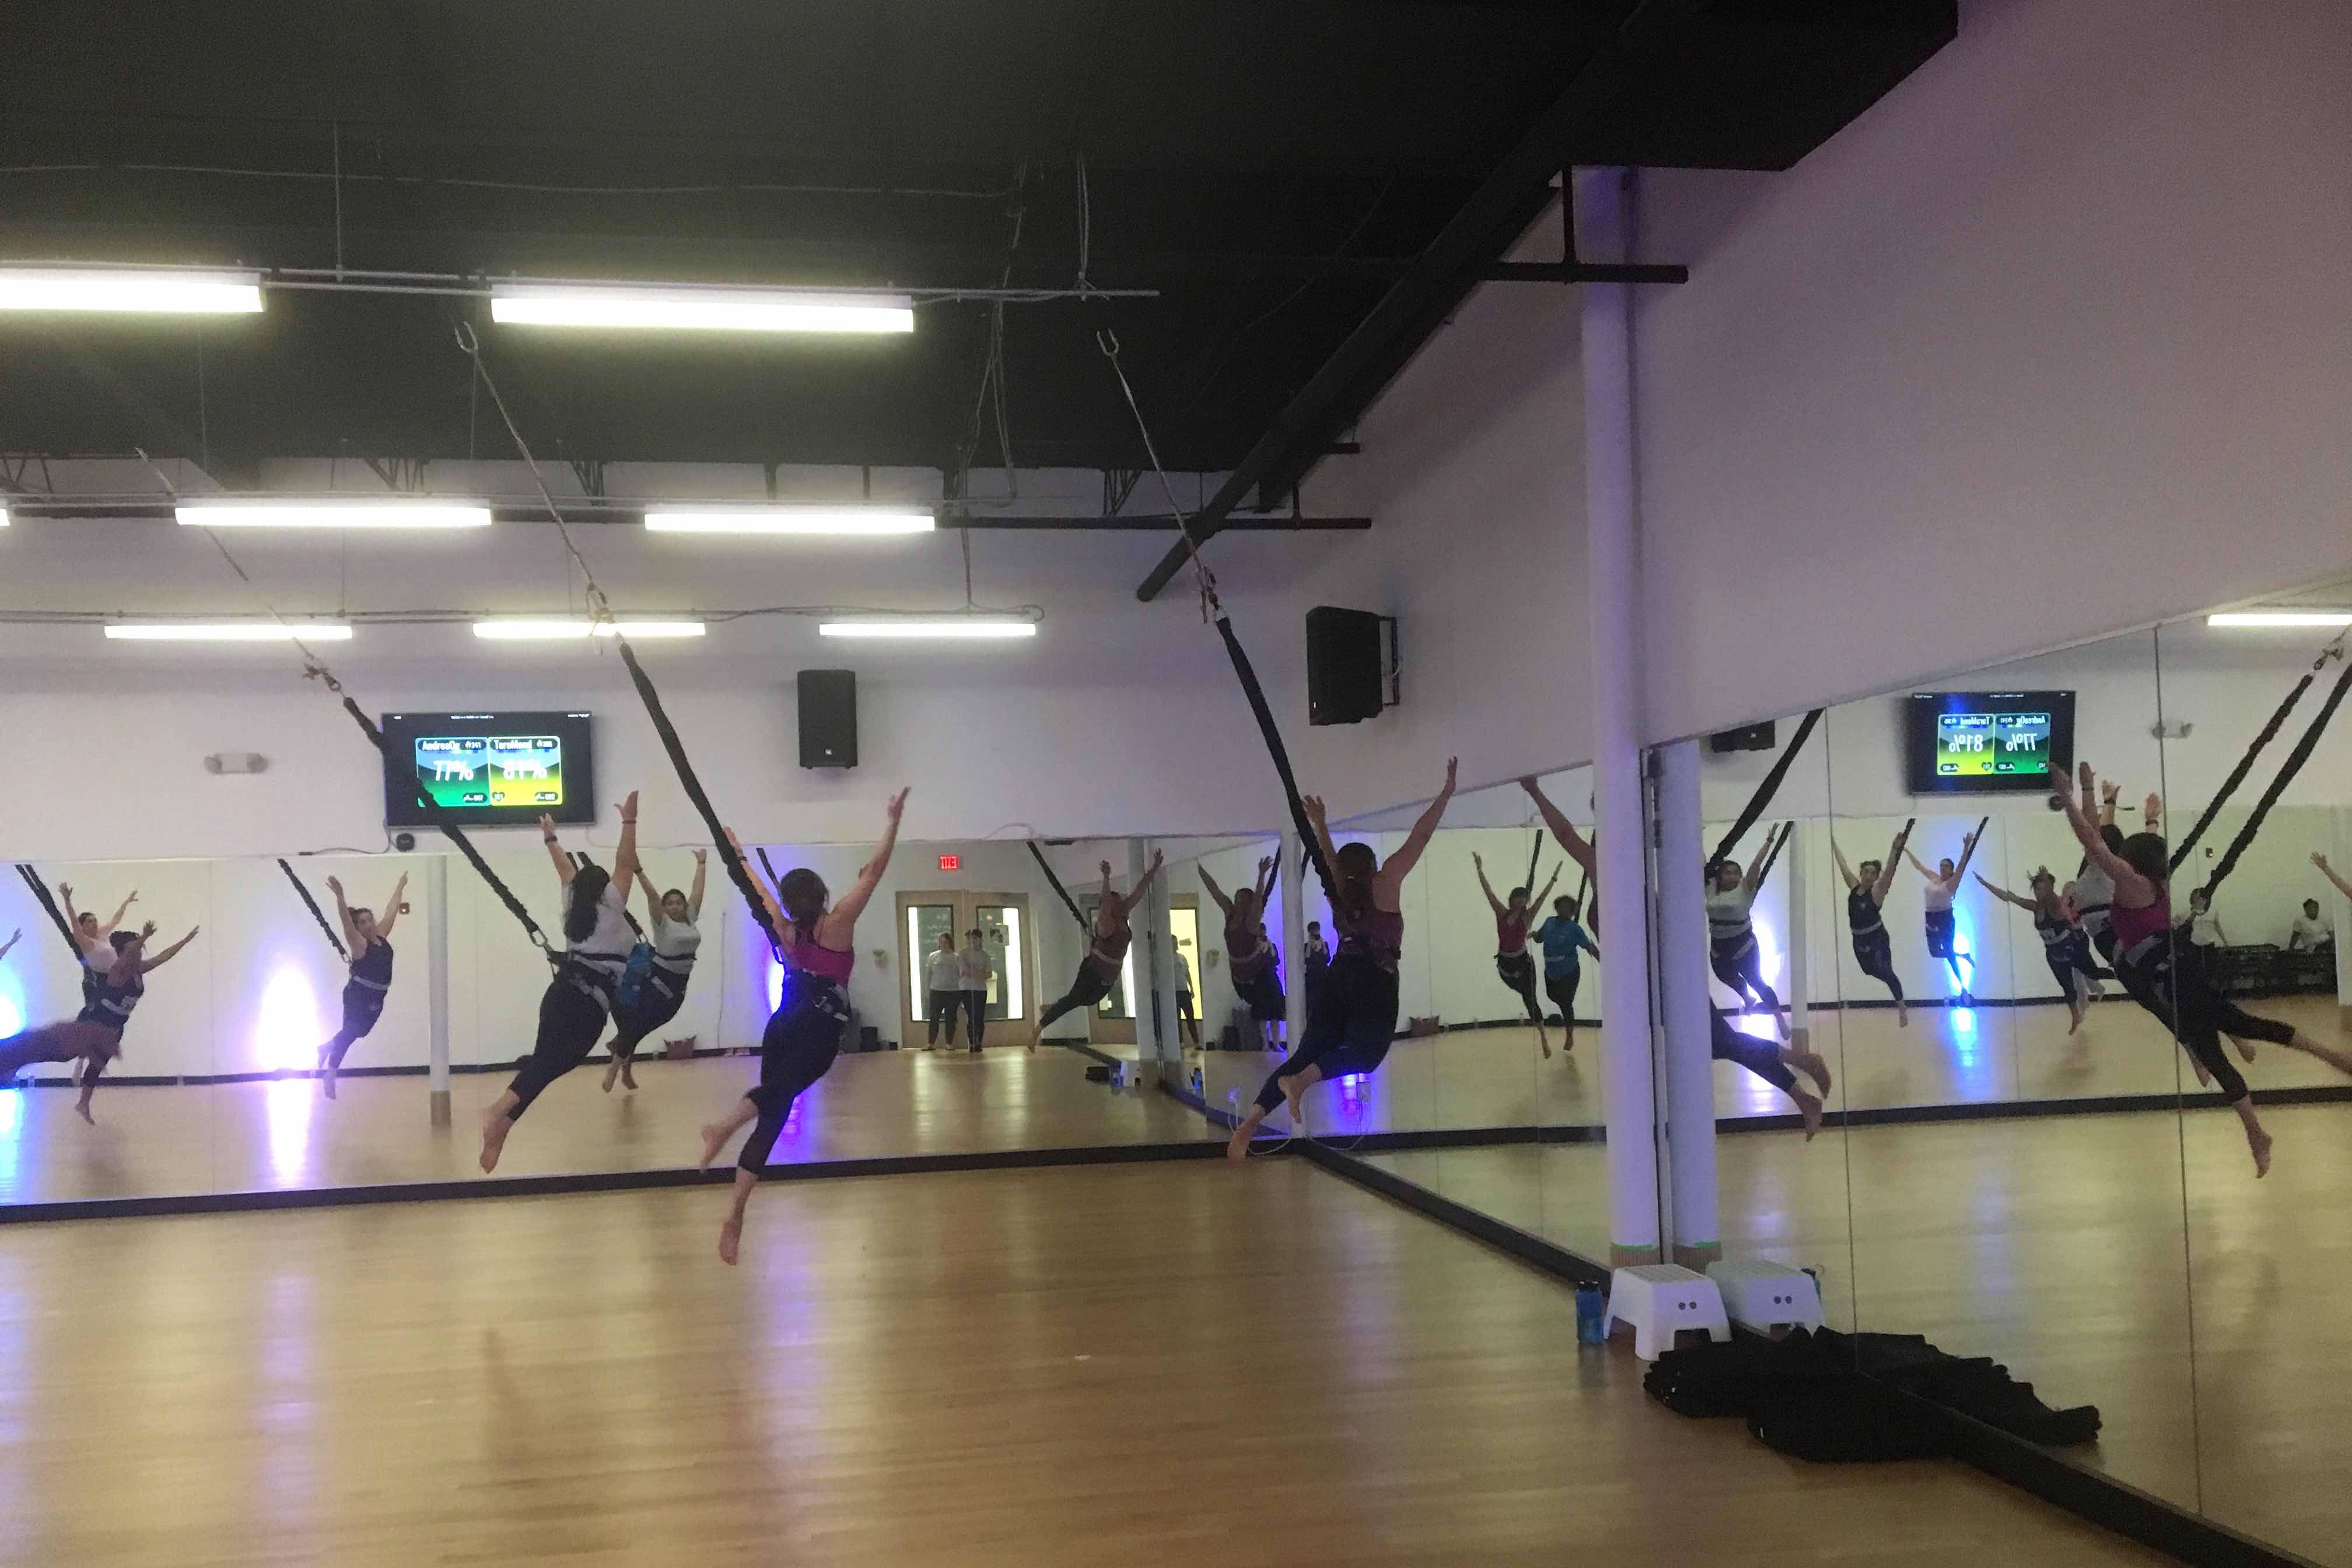 The Bungee Cord Workout That Went Viral Is Coming to a New Studio -  Philadelphia Magazine